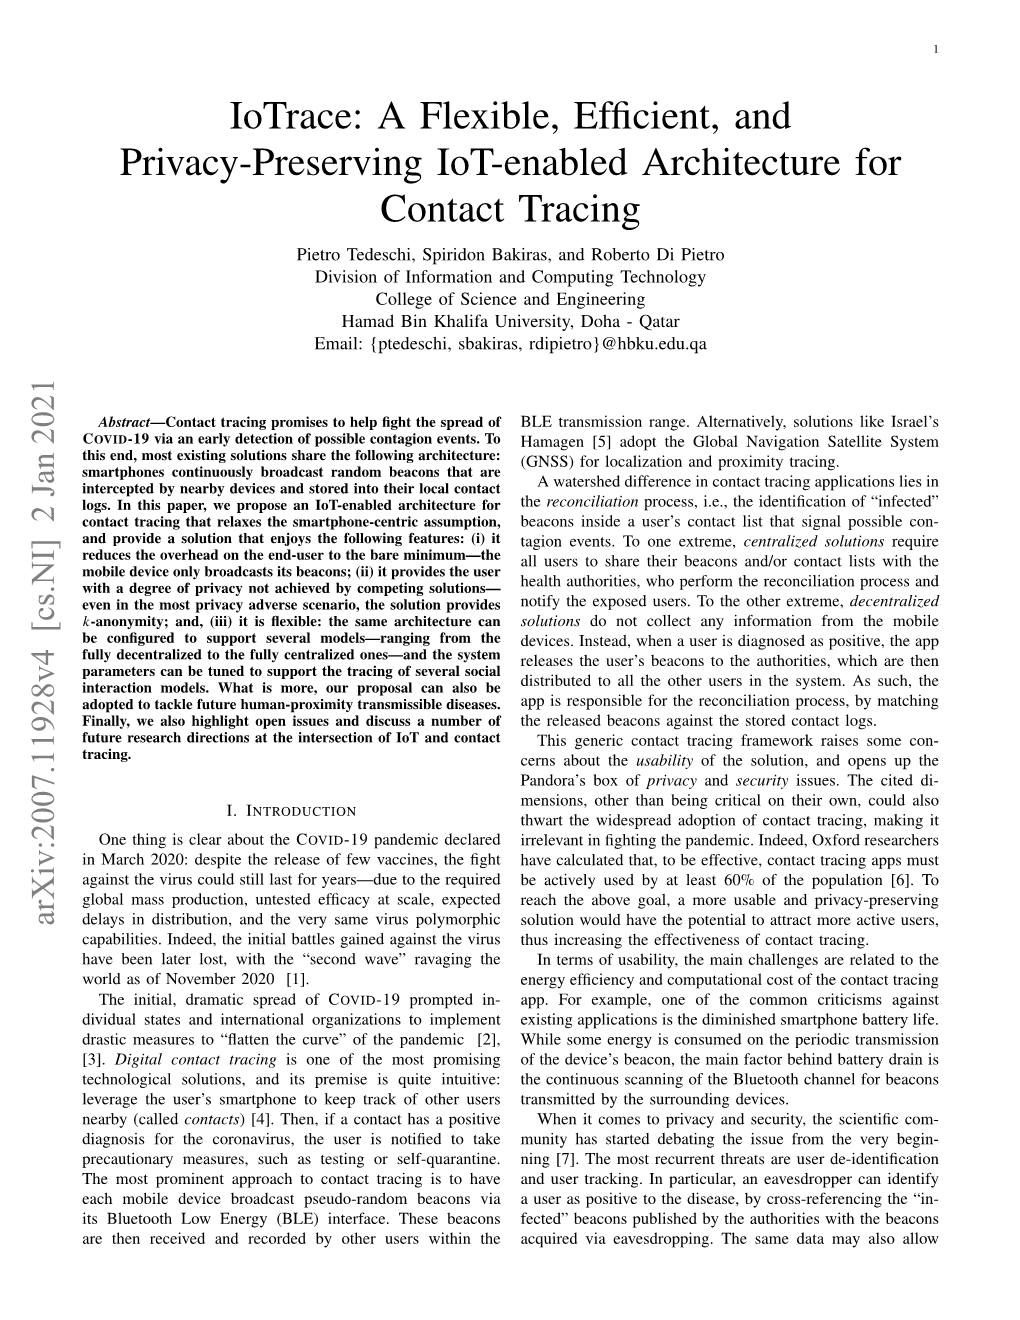 A Flexible, Efficient, and Privacy-Preserving Iot